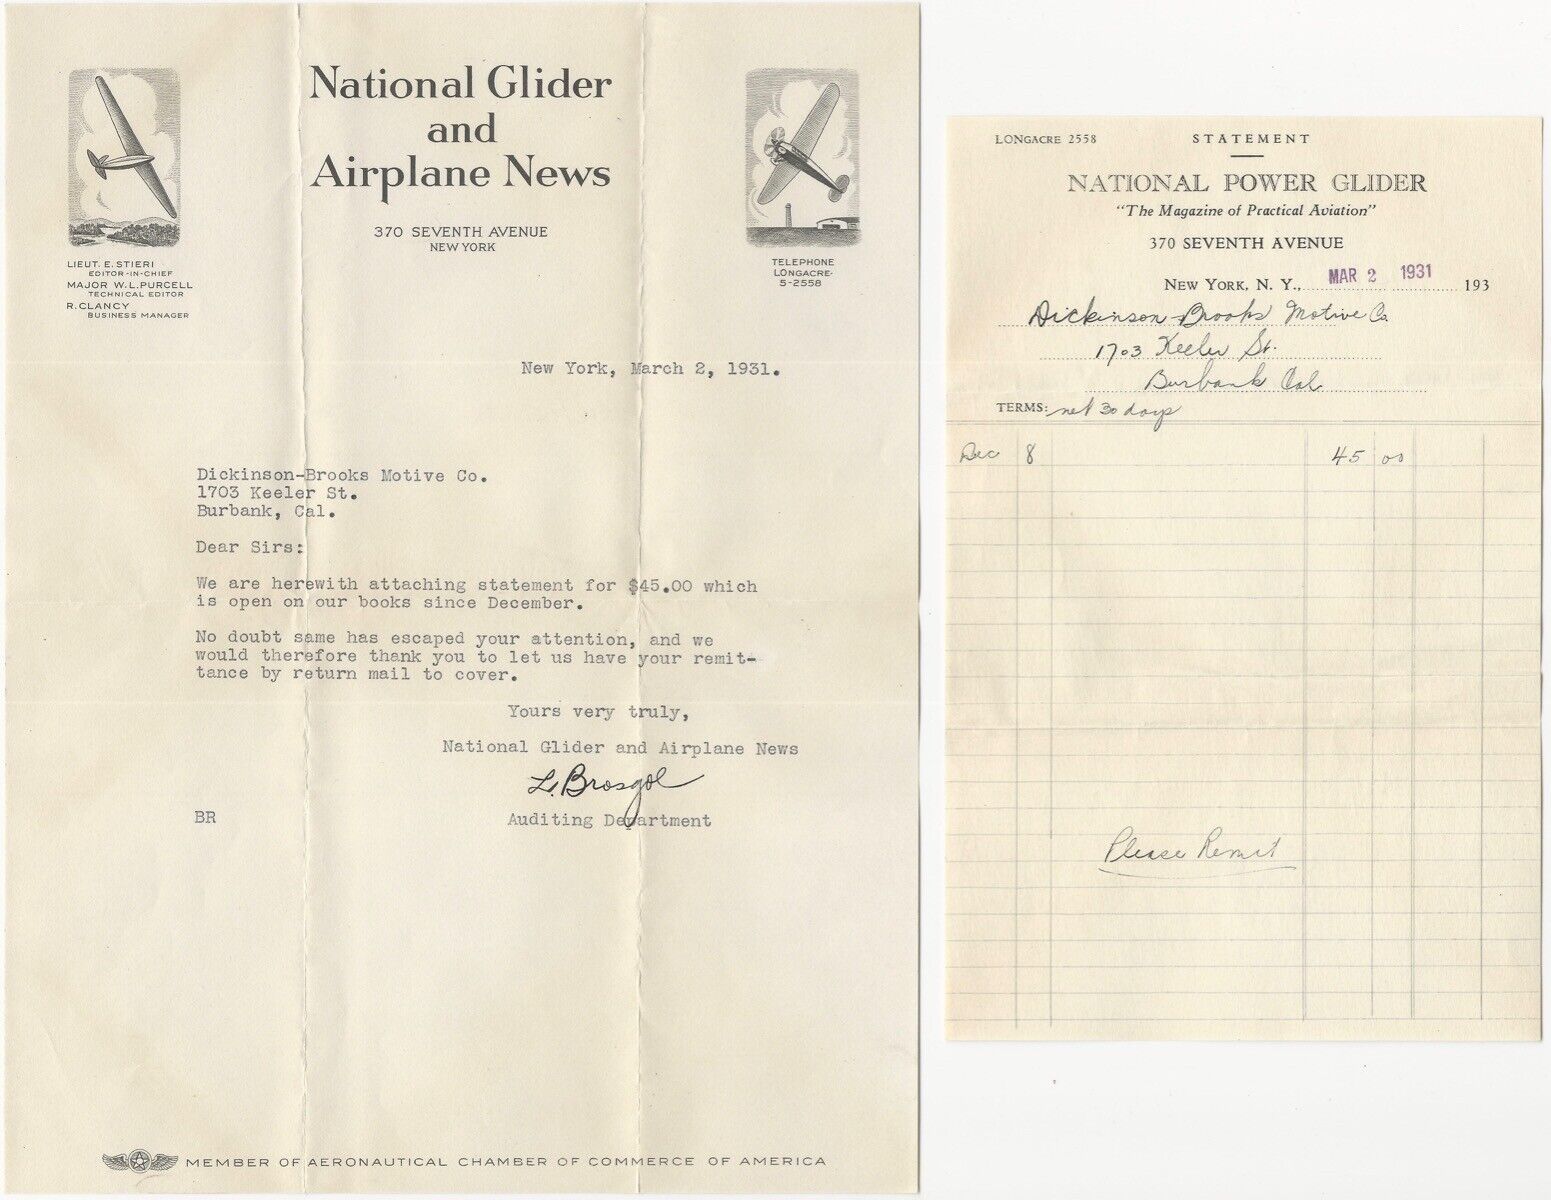 1931 National Glider and Airplane News Illustrated Letterhead and Billhead